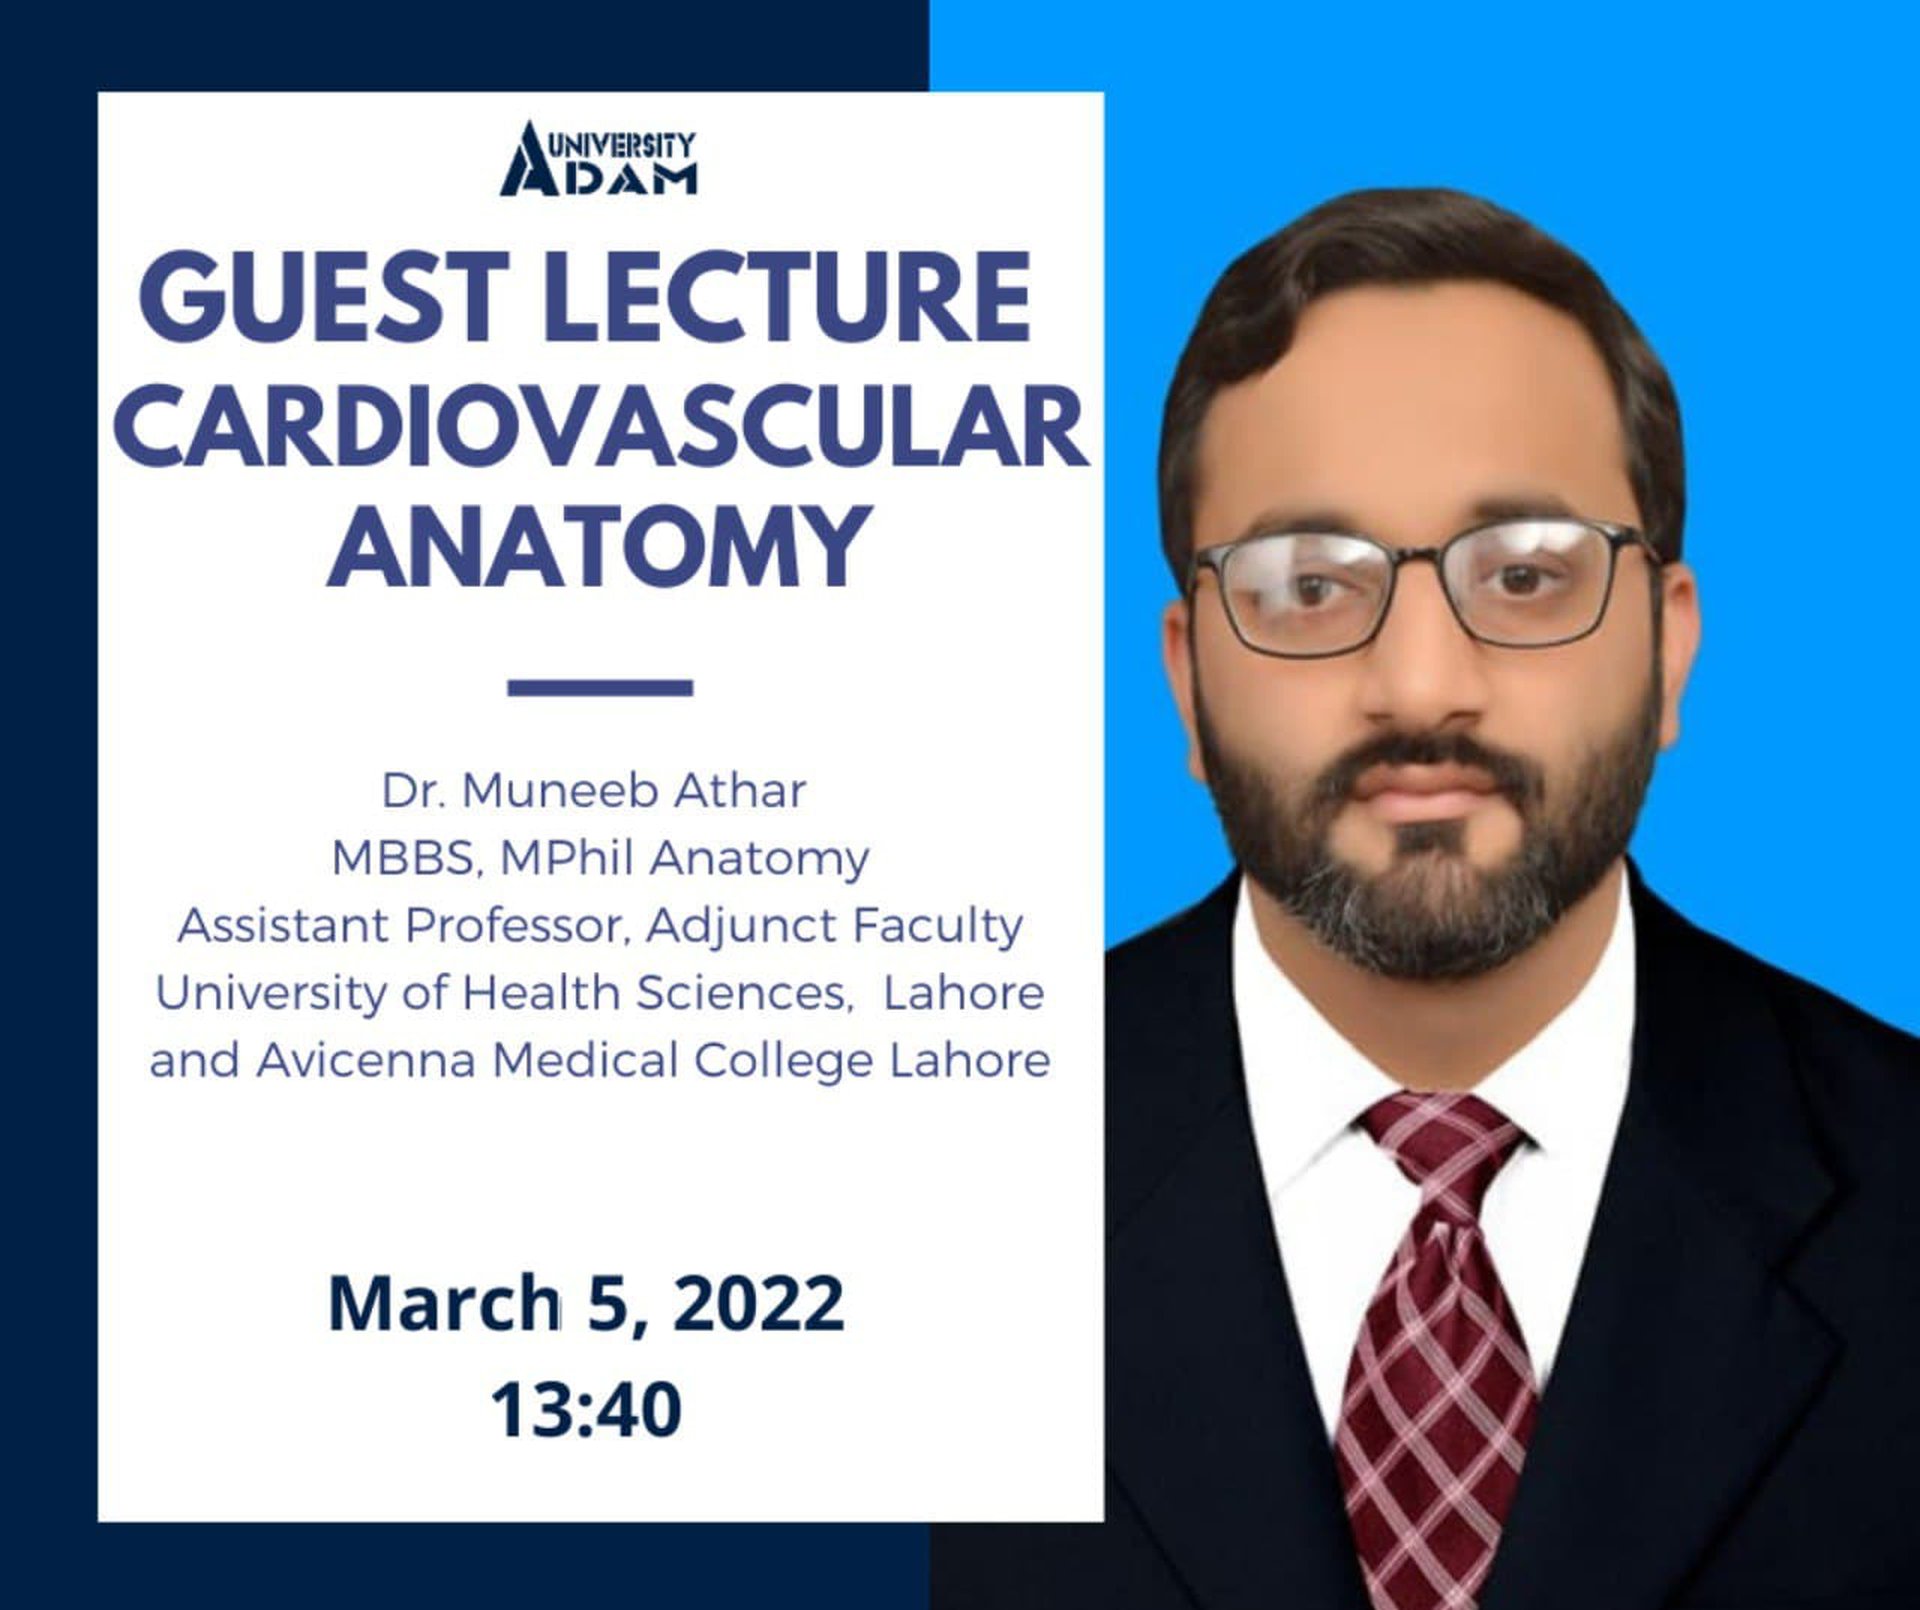 We invite you to the guest lecture of Dr. Muneeb Athar